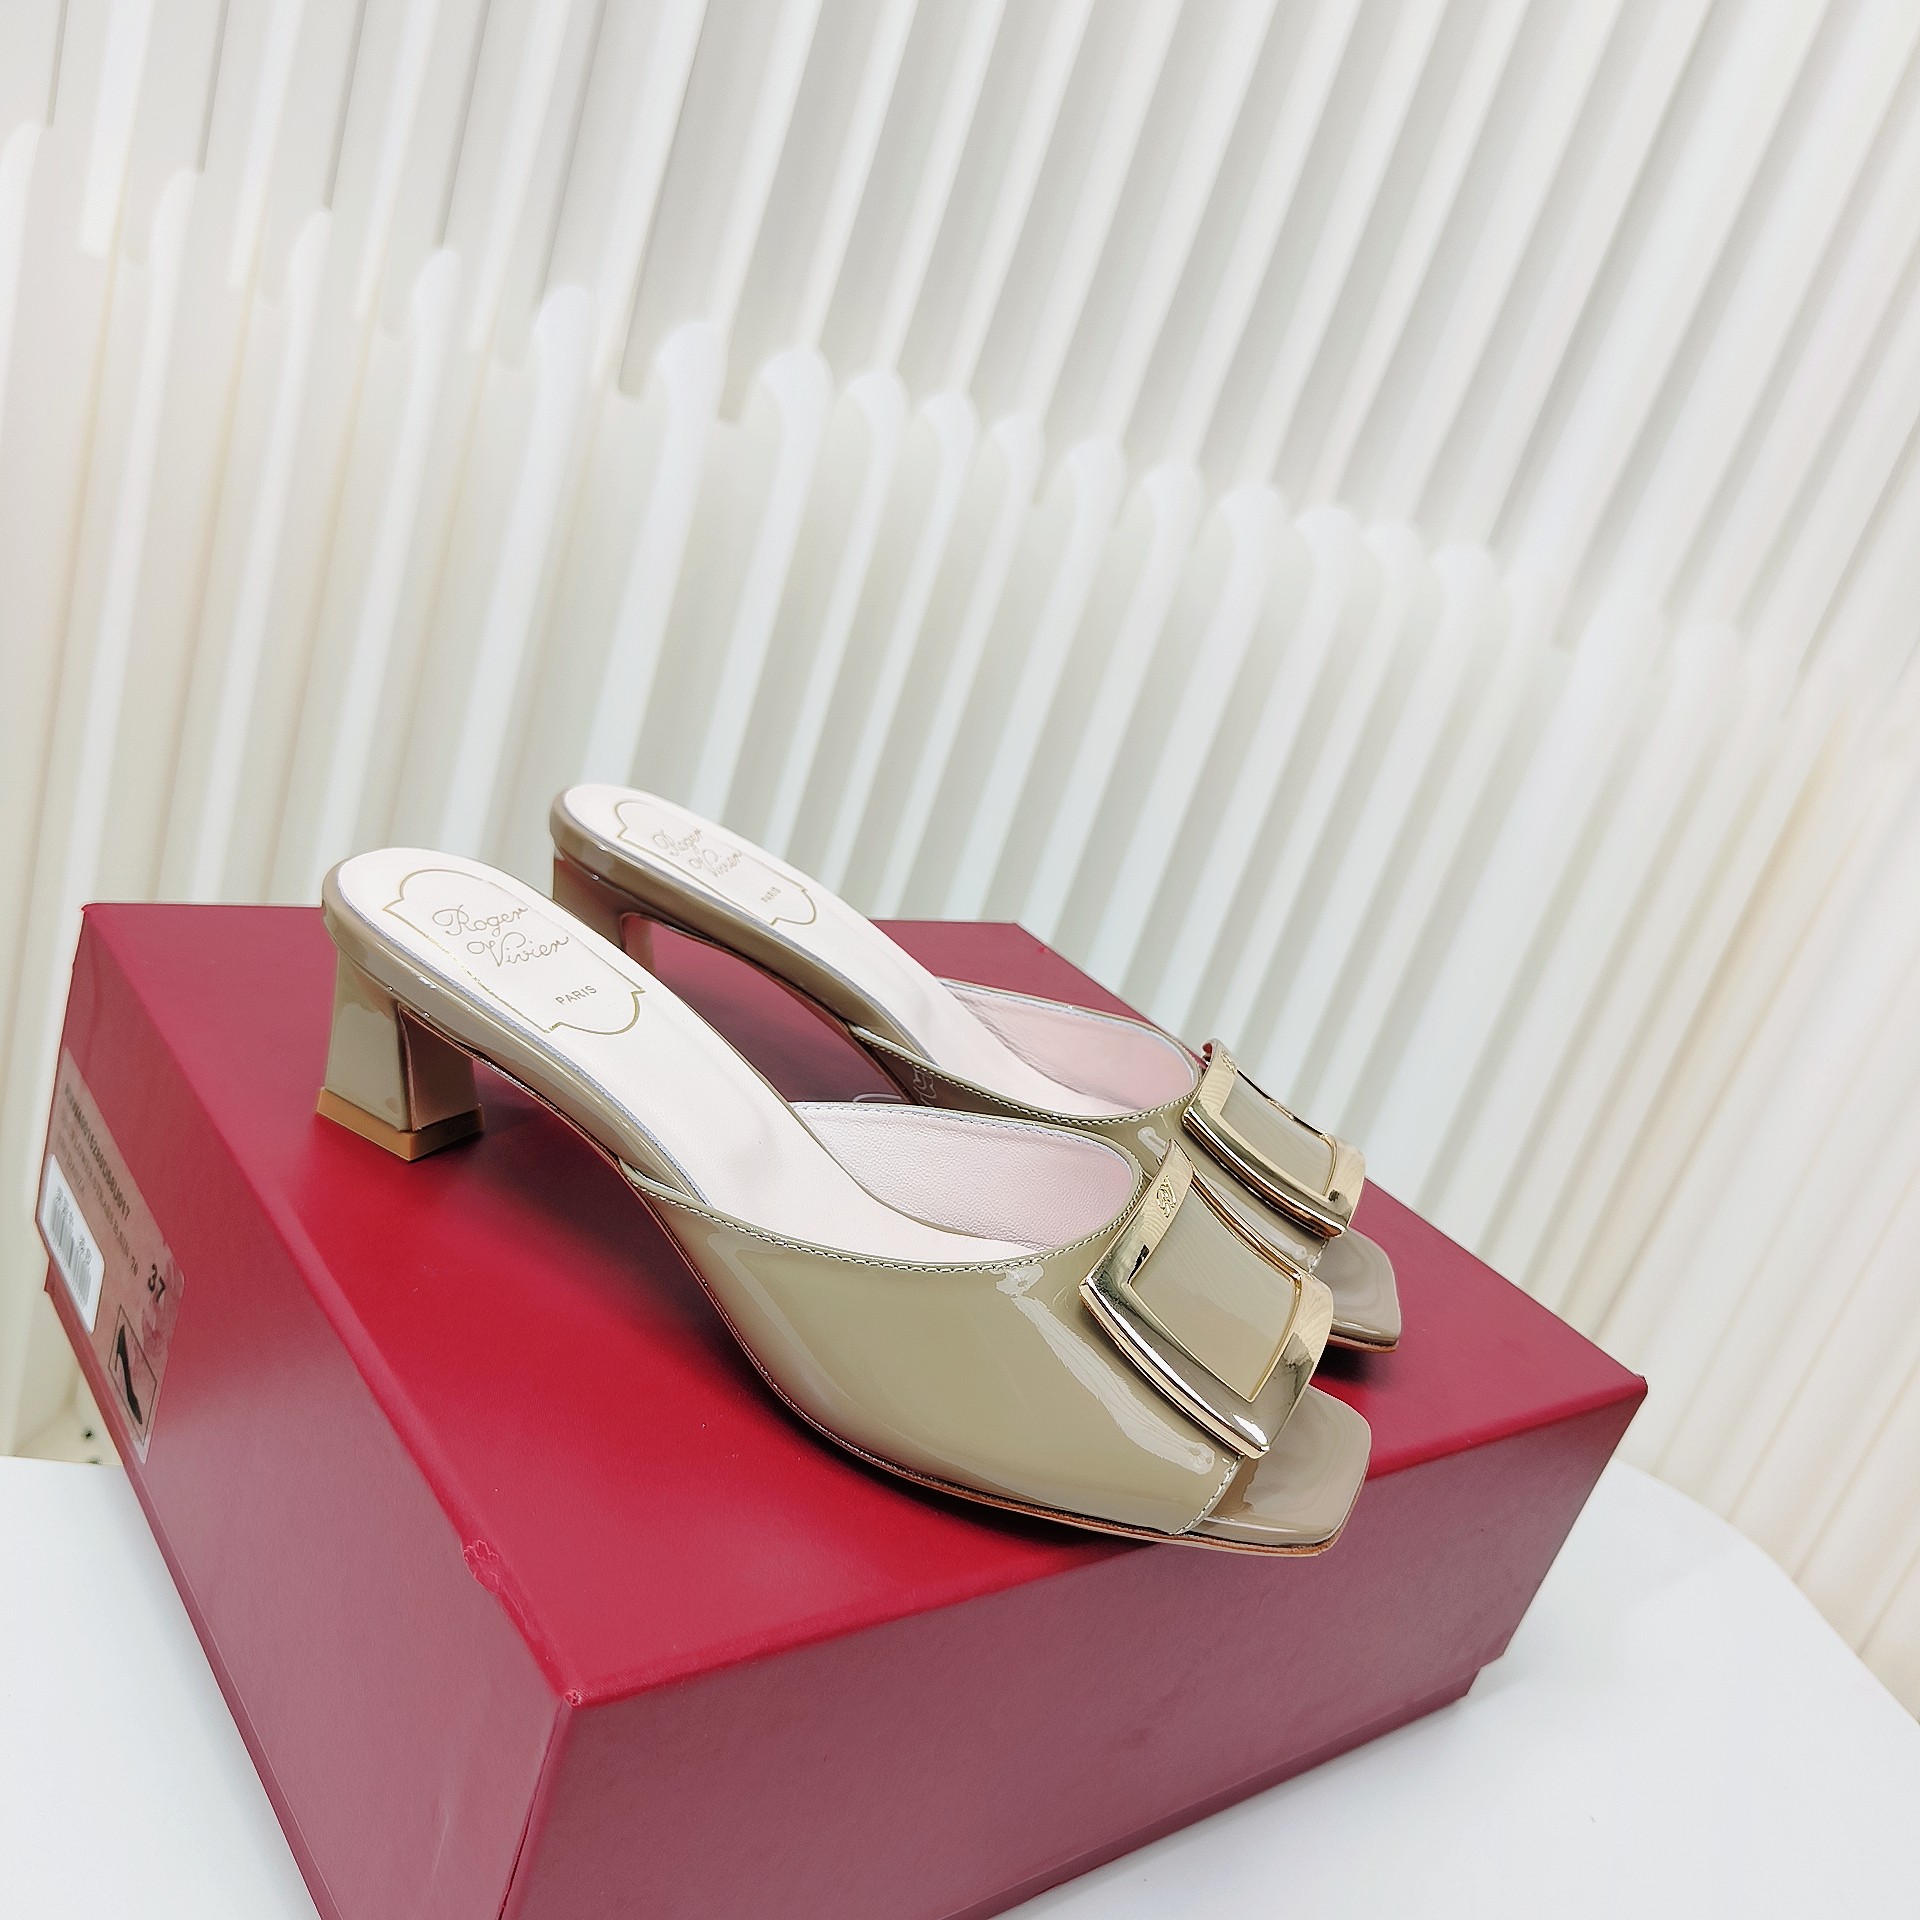 Replcia Cheap From China
 Roger Vivier Shoes Slippers Patent Leather Summer Collection